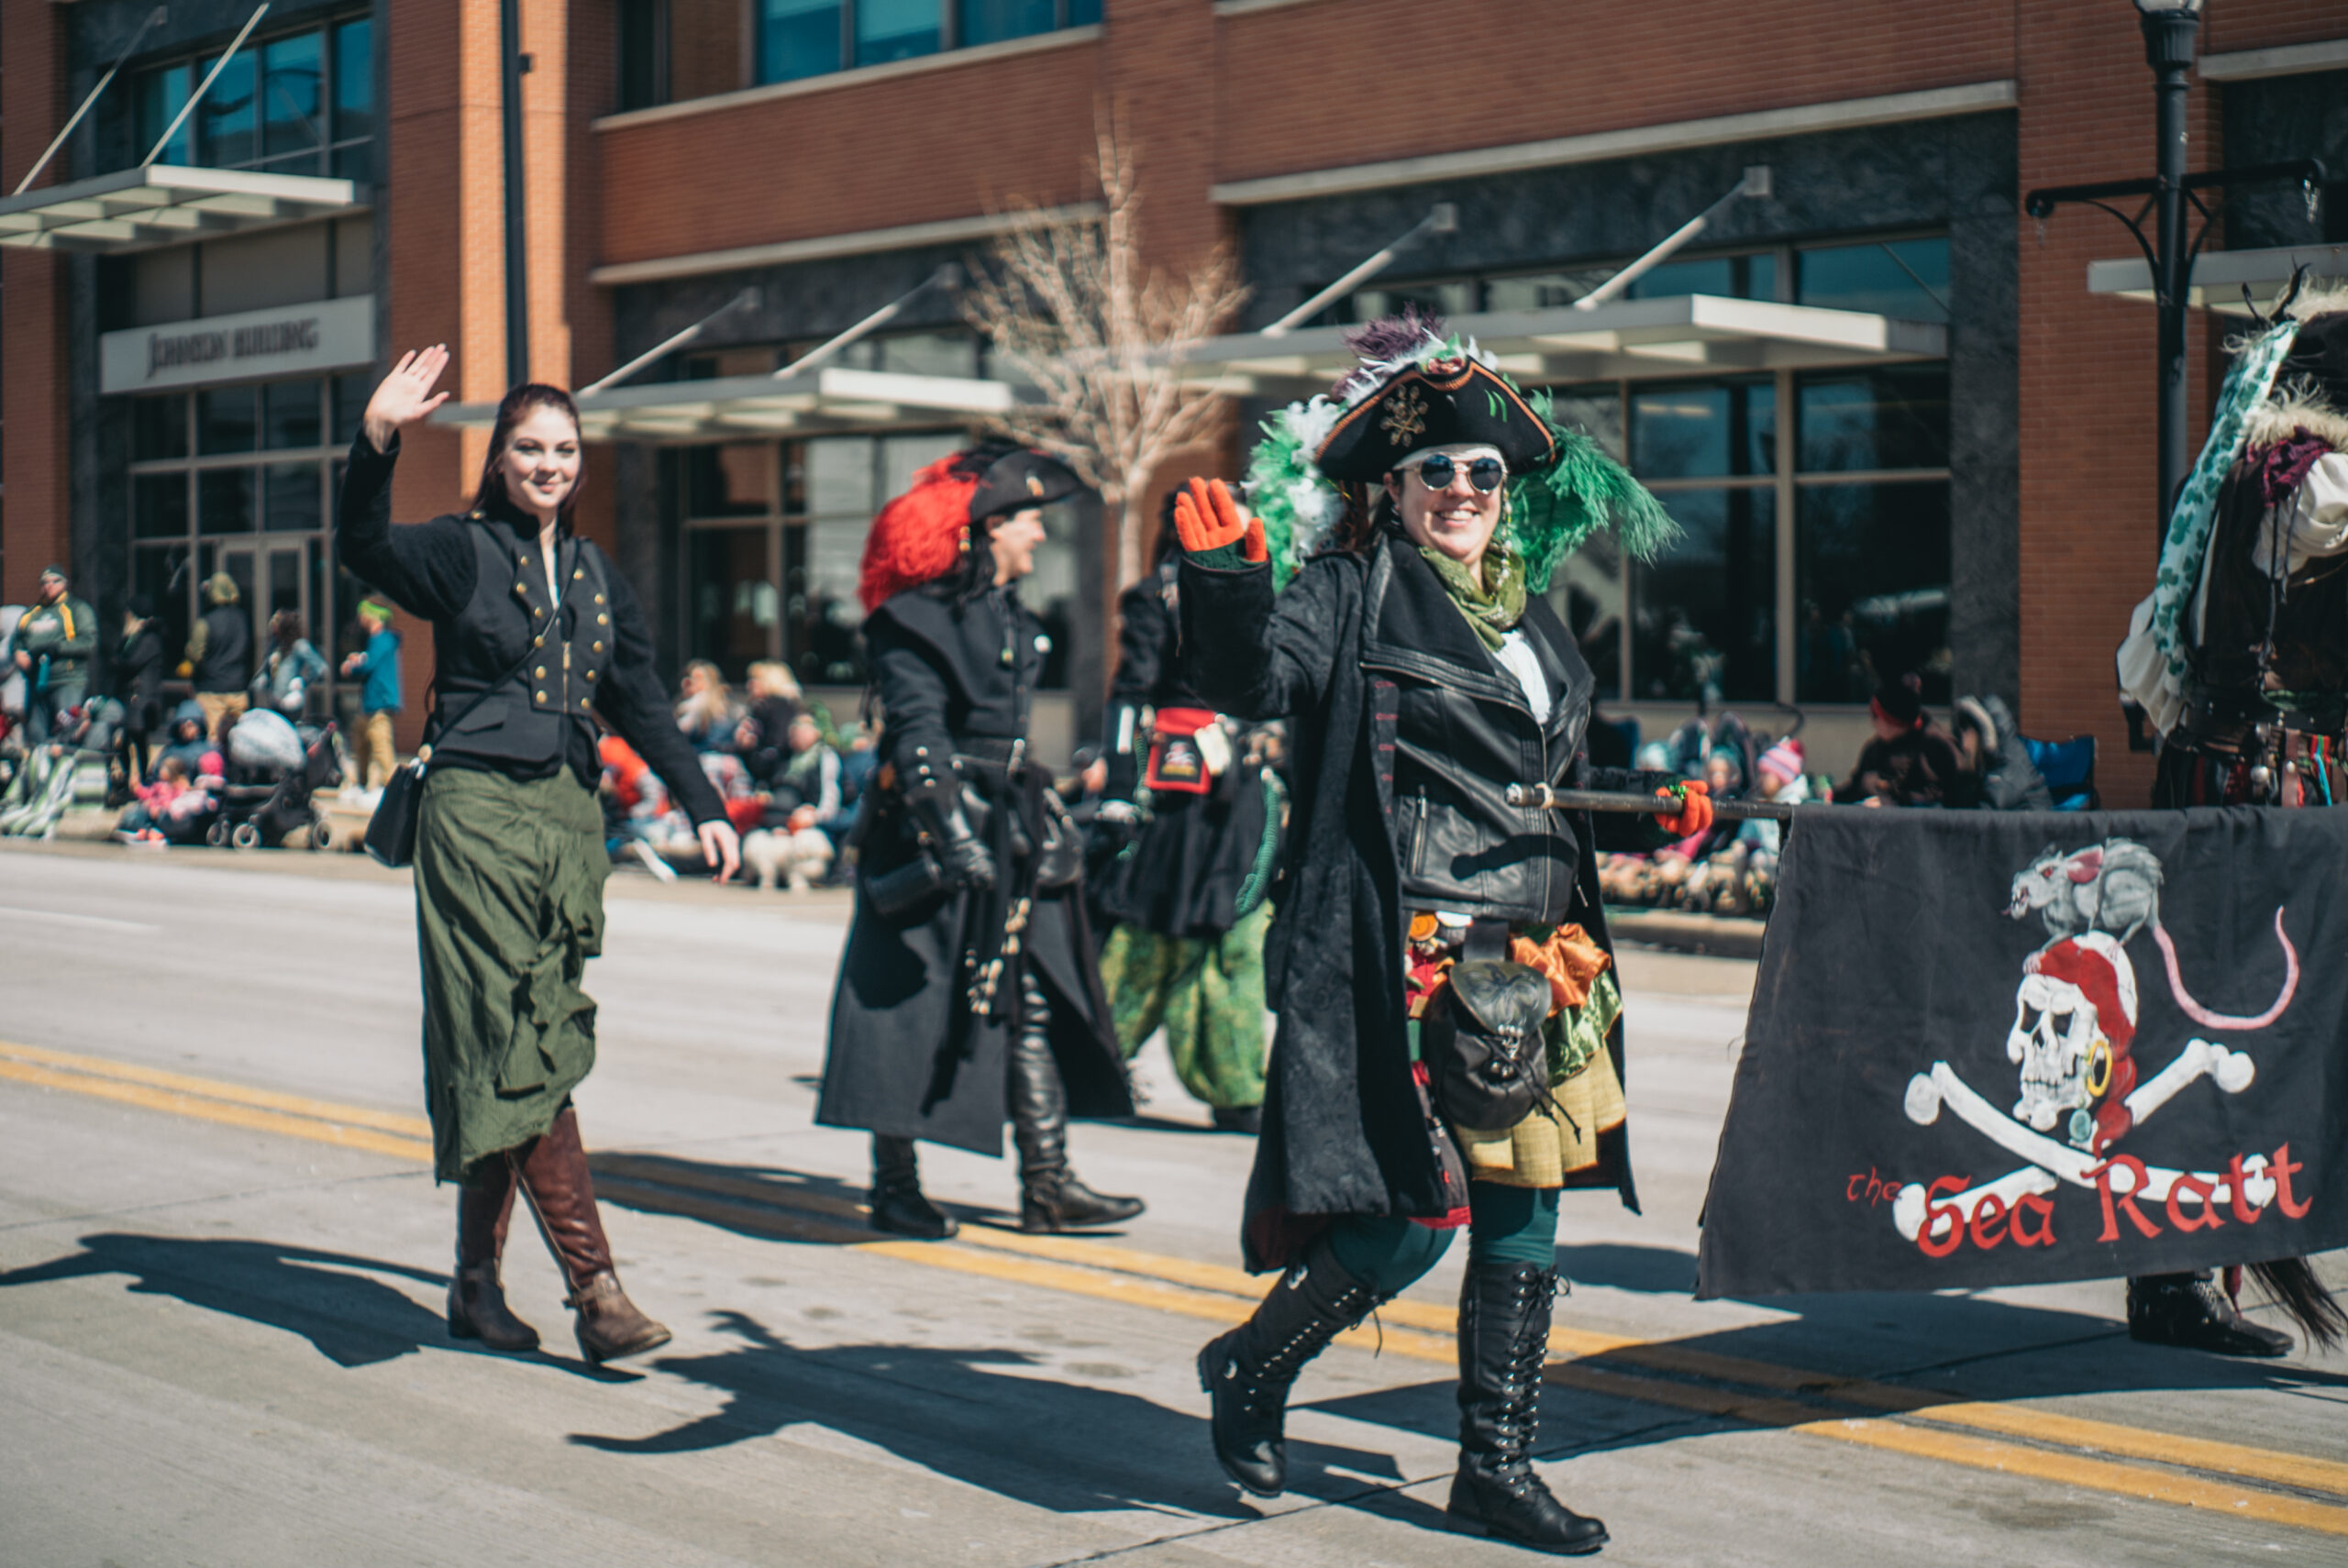 Downtown Racine Corporation St. Patrick’s Day Parade Lineup Announced